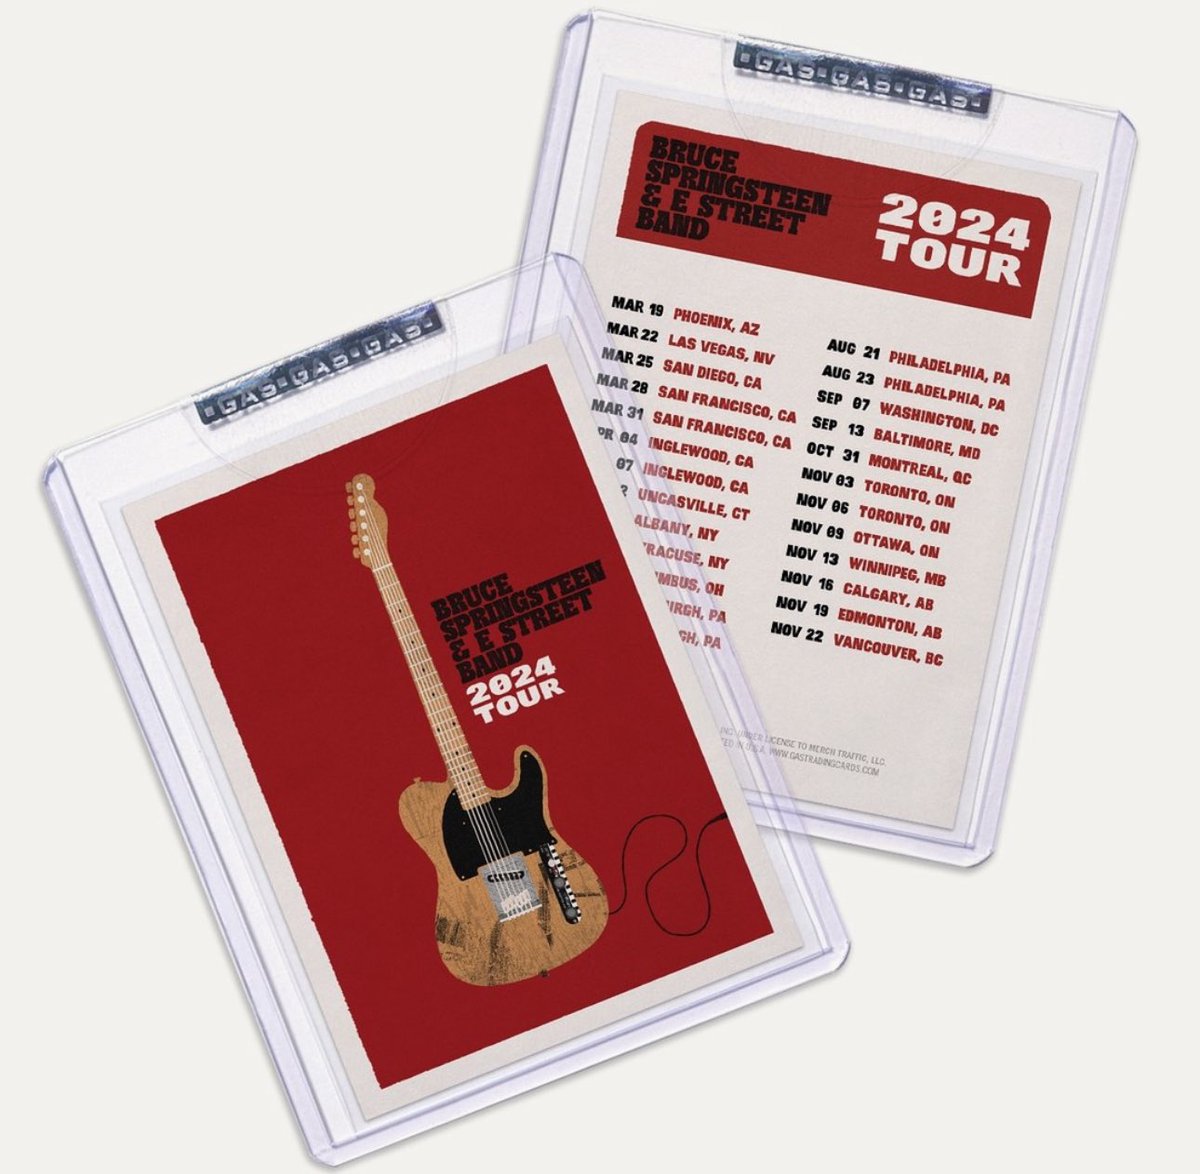 GAS is proud to present the official @springsteen & E Street Band 2024 North America Tour Trading Cards, featuring the @collectionzz poster artwork. The tour card is available, along with setlist cards the day of each show, at brucespringsteen.store